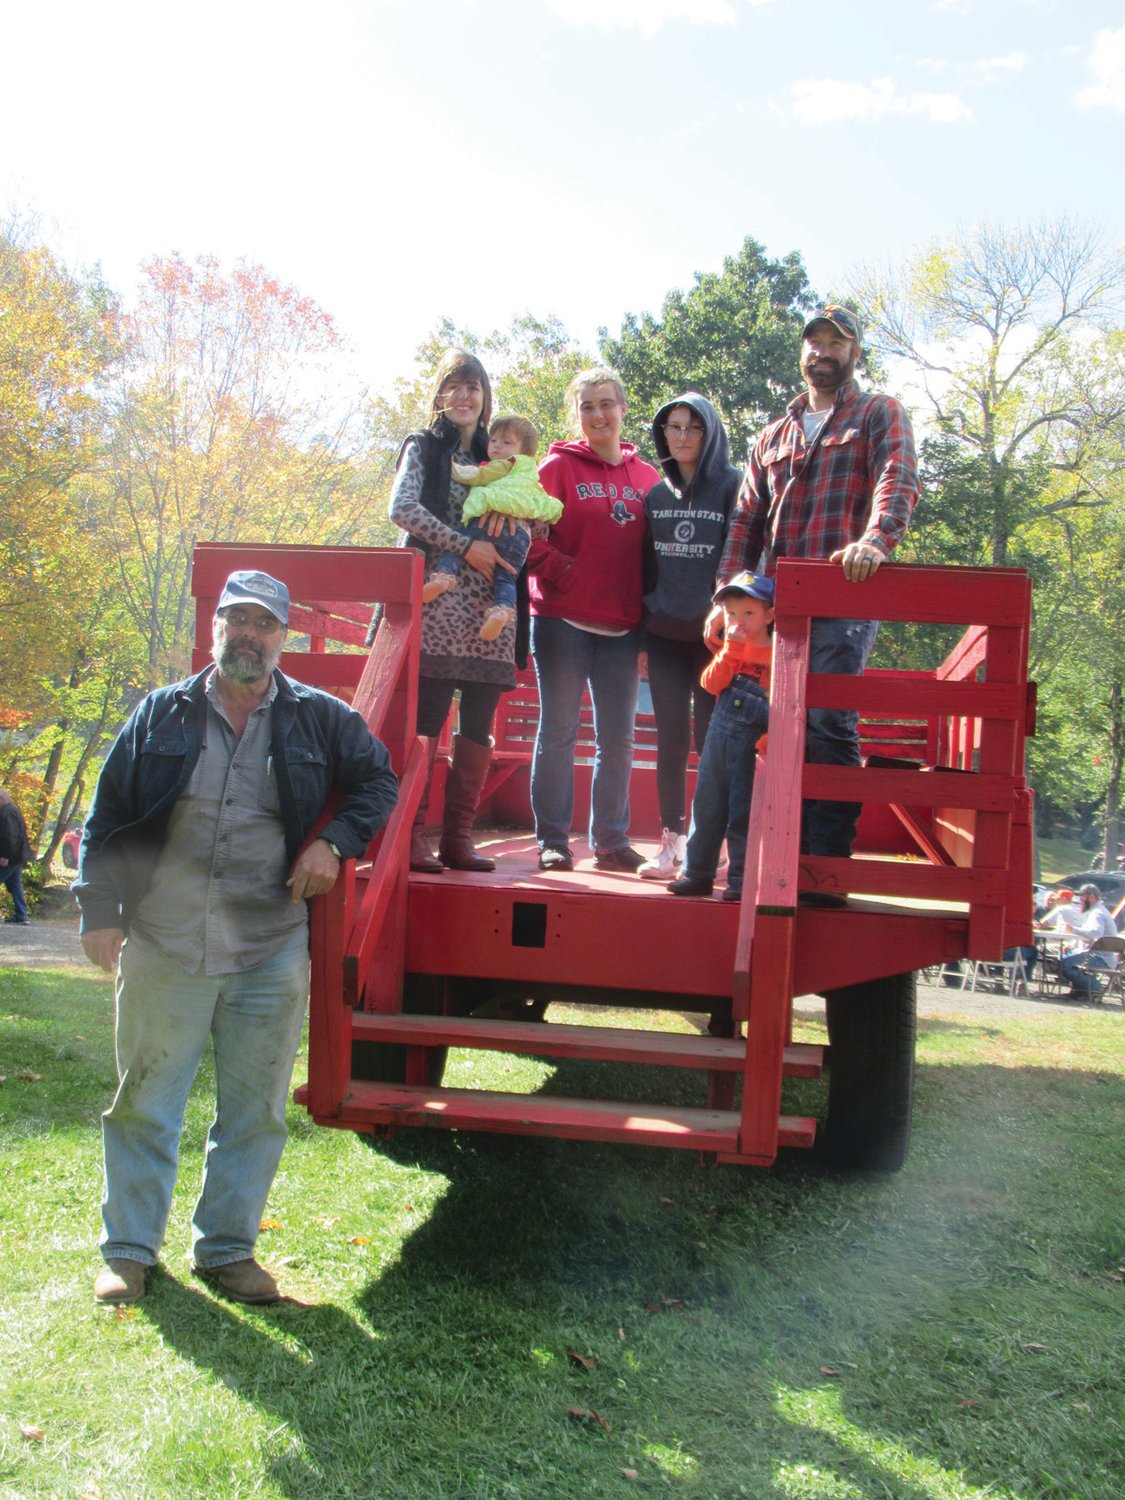 FAMILY FUN: Karl Russo (left) and his family were among the many people of all ages who enjoyed old-fashioned hay rides Sunday at Rossi’s Christmas Tree Farm in Cranston.